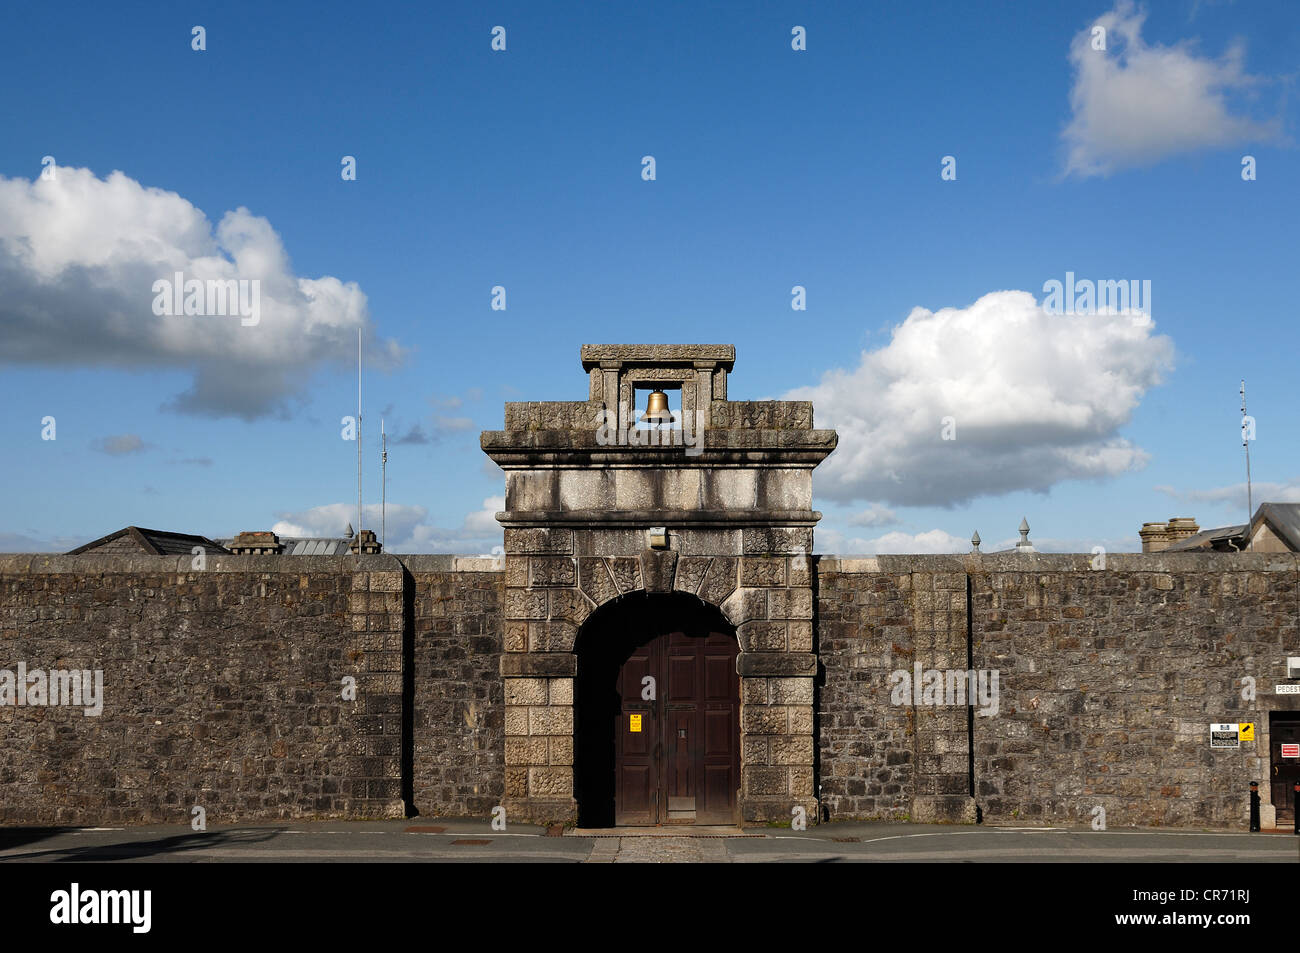 HM Prison Dartmoor, entrance gate with a bell, built between 1806 and 1809, Princetown, Dartmoor, Devon, England, United Kingdom Stock Photo